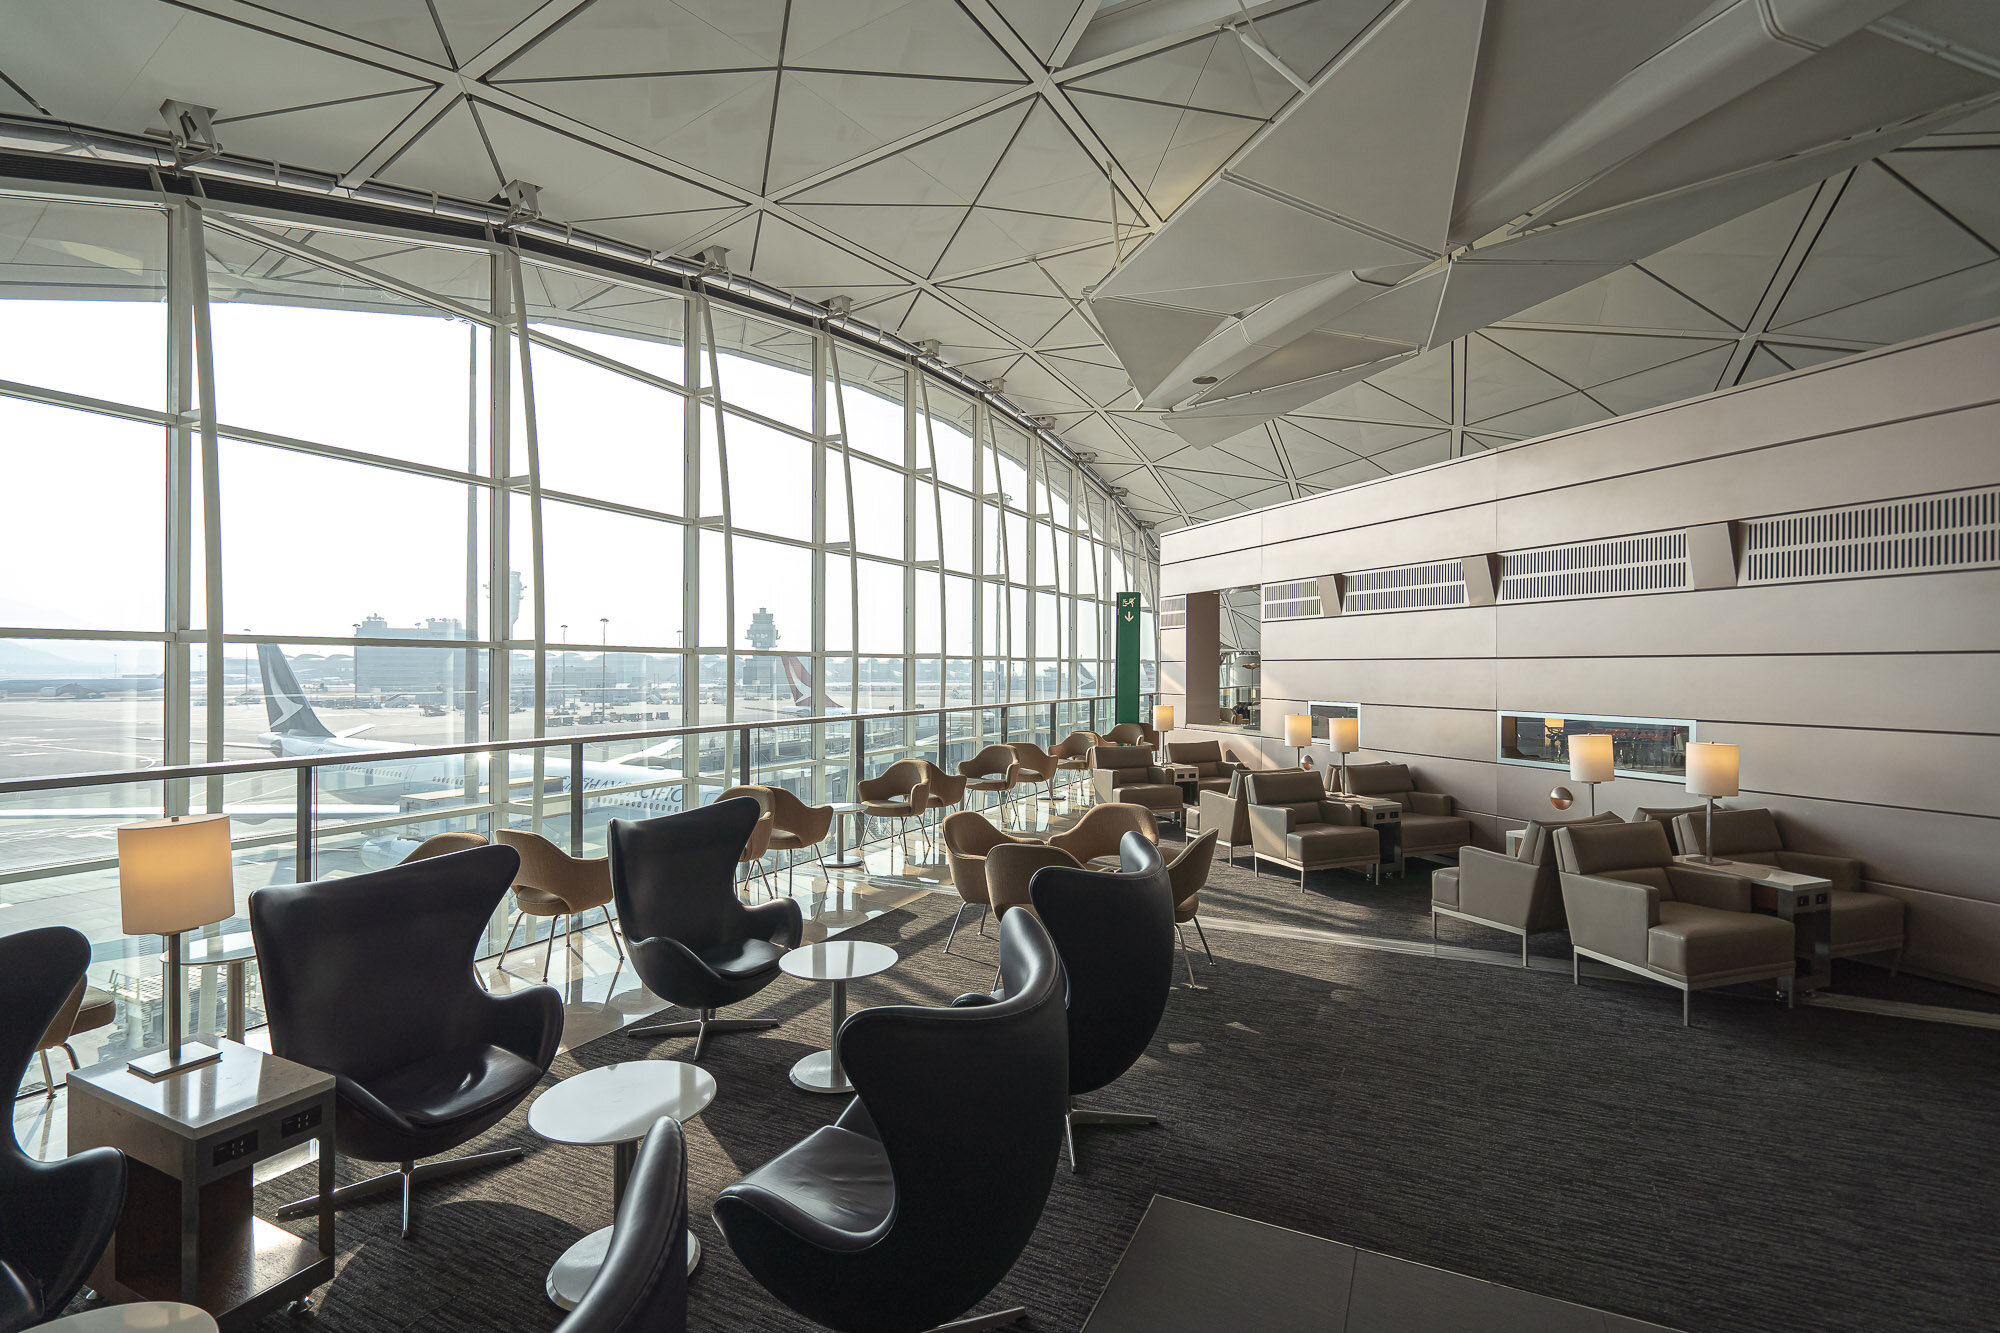 Seating area overlooking the planes